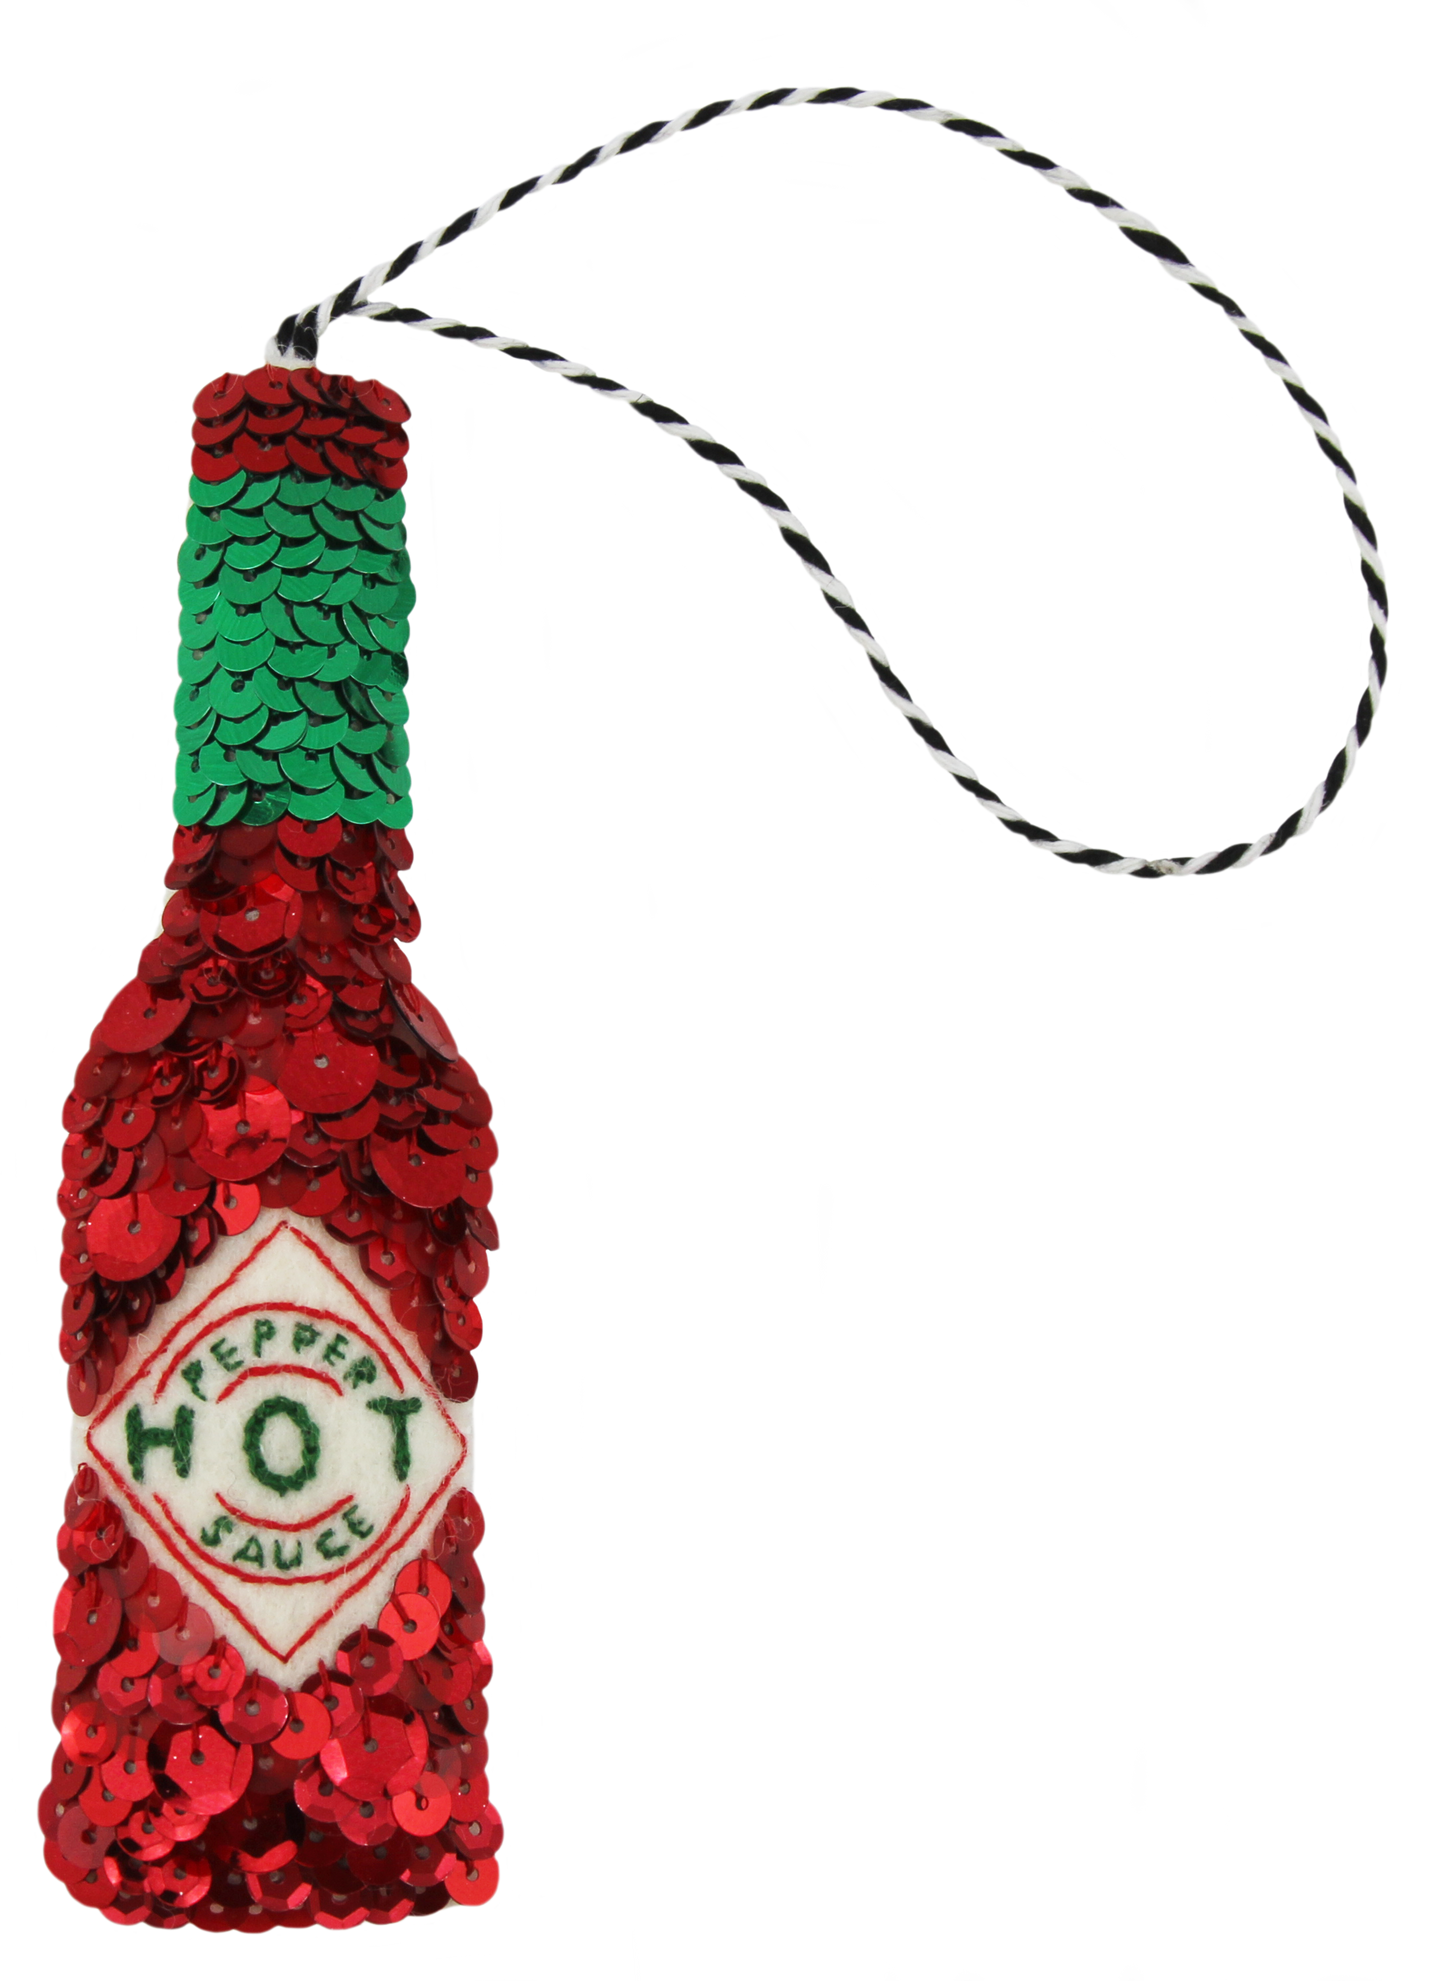 The Hot Sauce Sequin Hanging Decoration